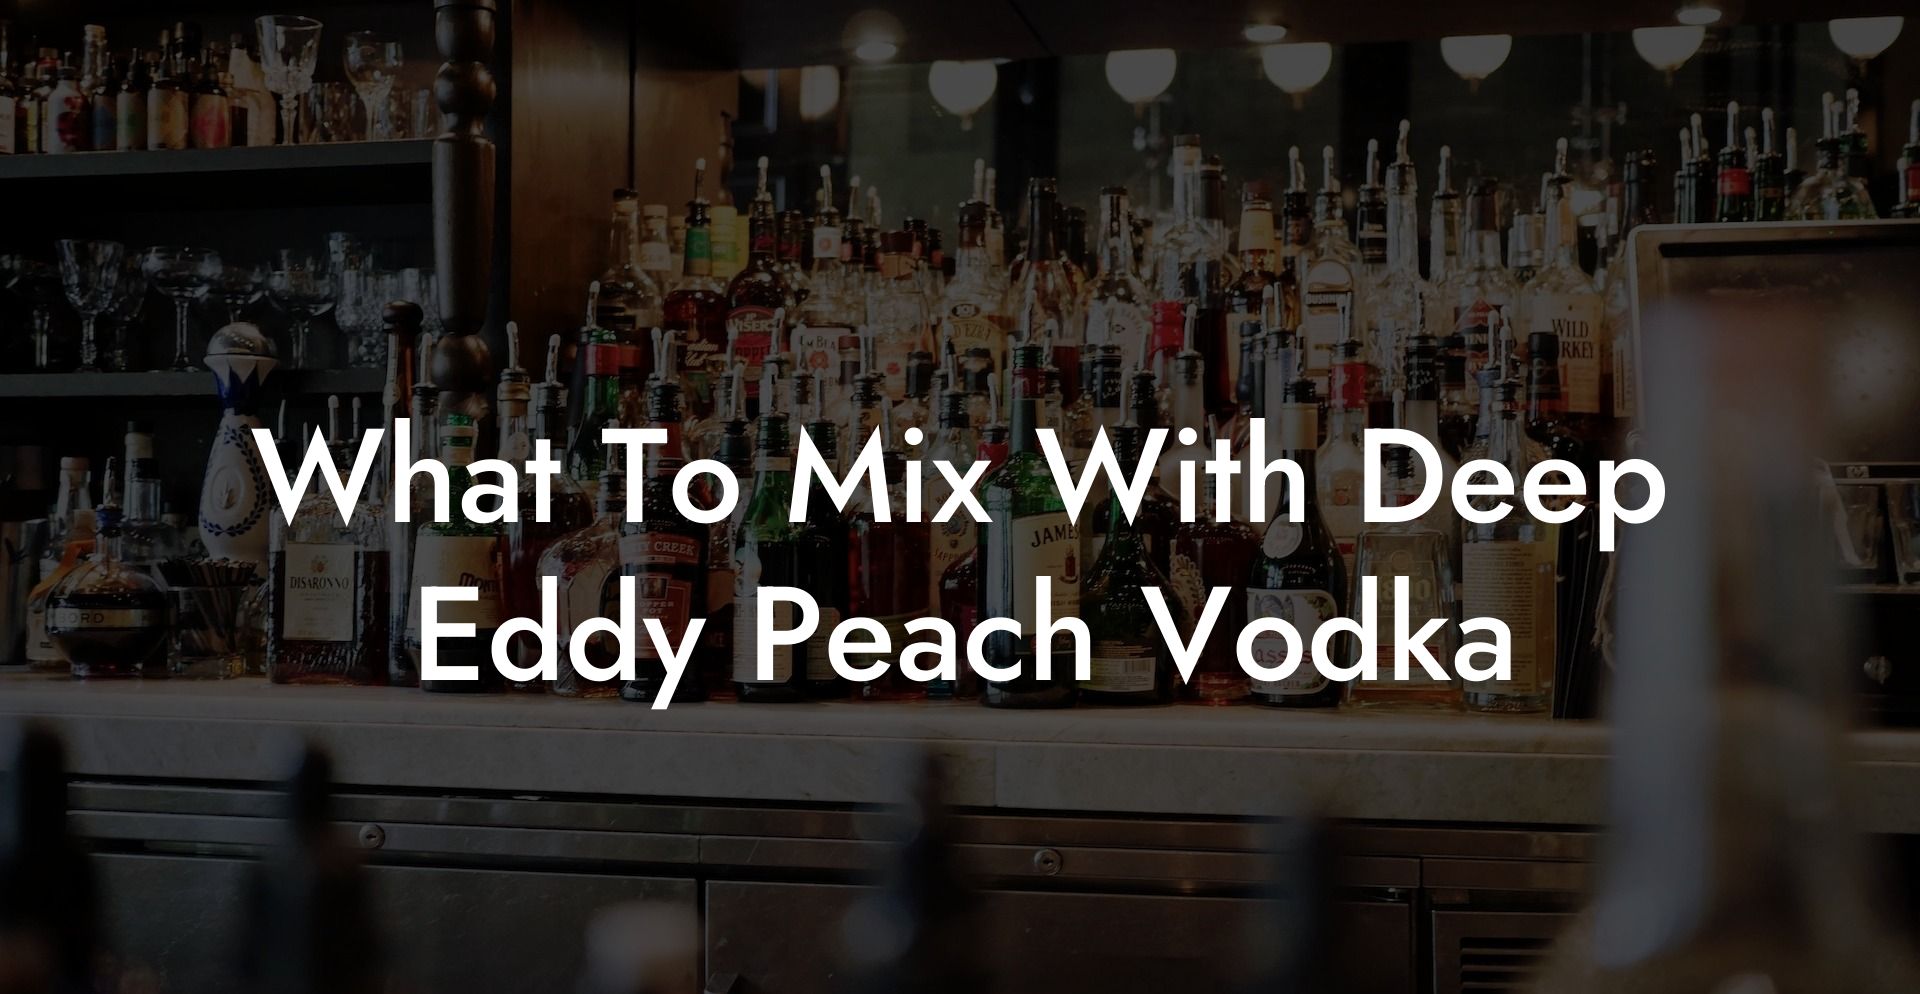 What To Mix With Deep Eddy Peach Vodka